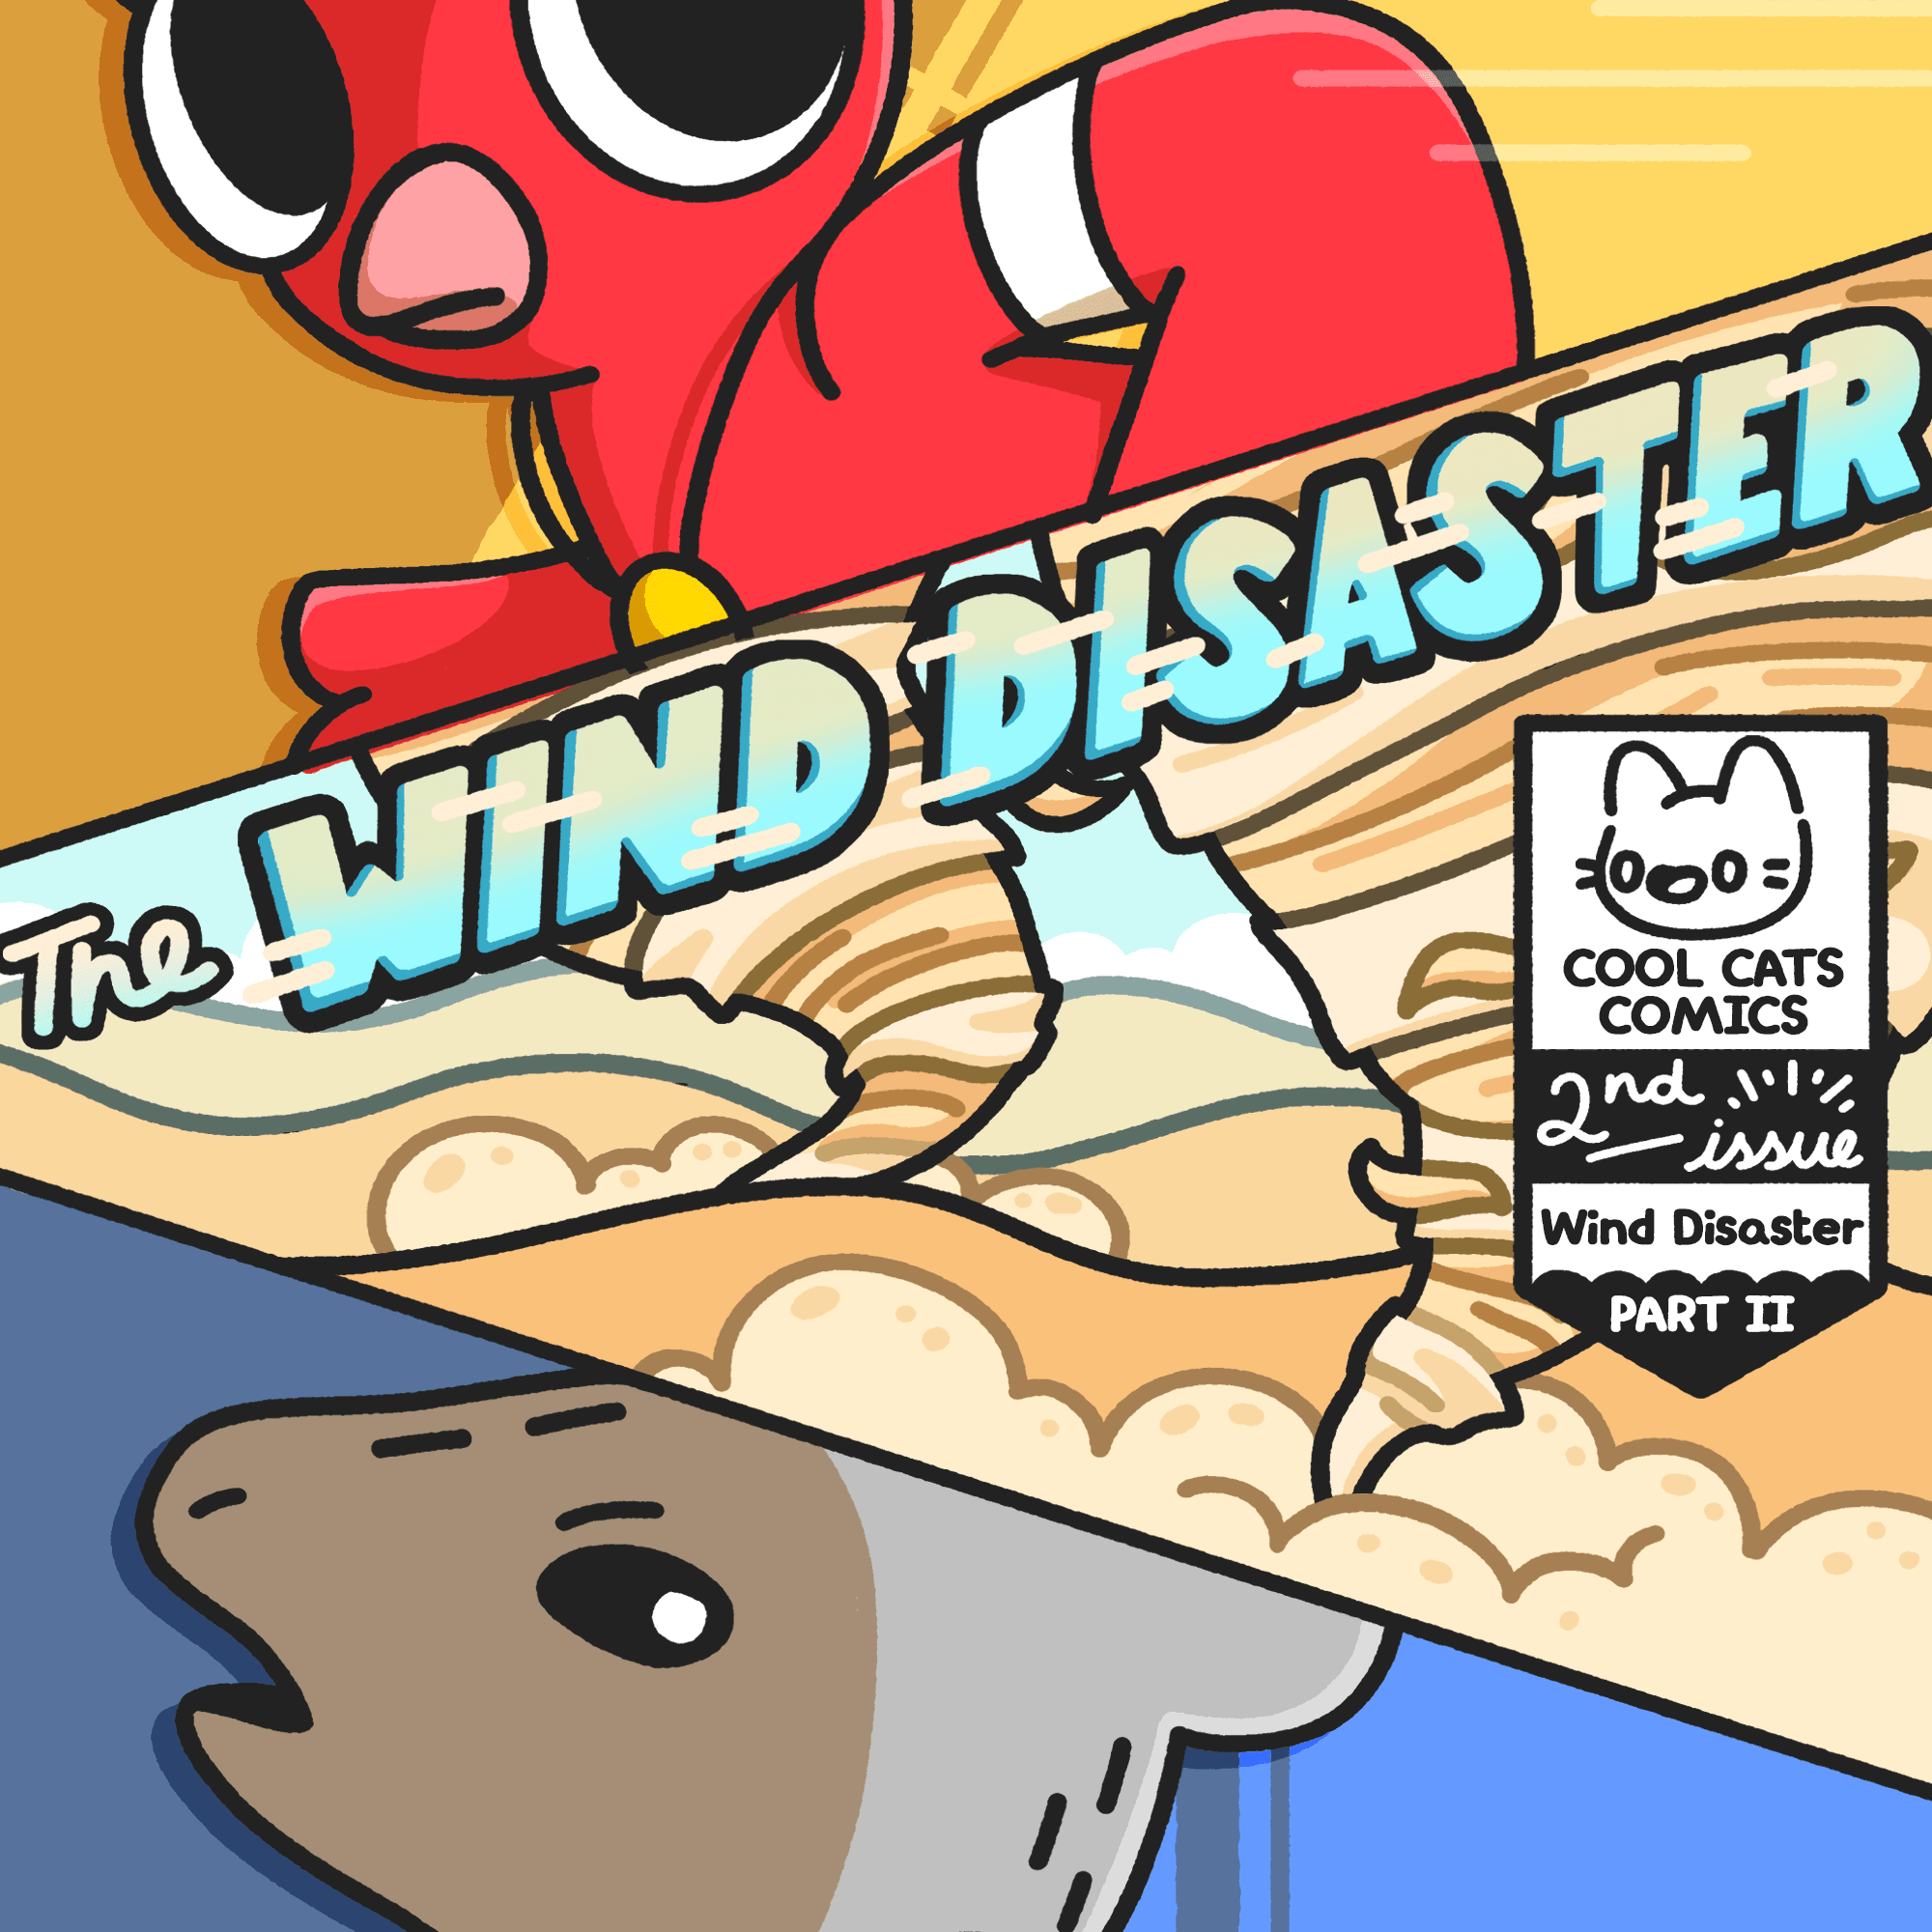 Jo, Ardi and The Wind Disaster